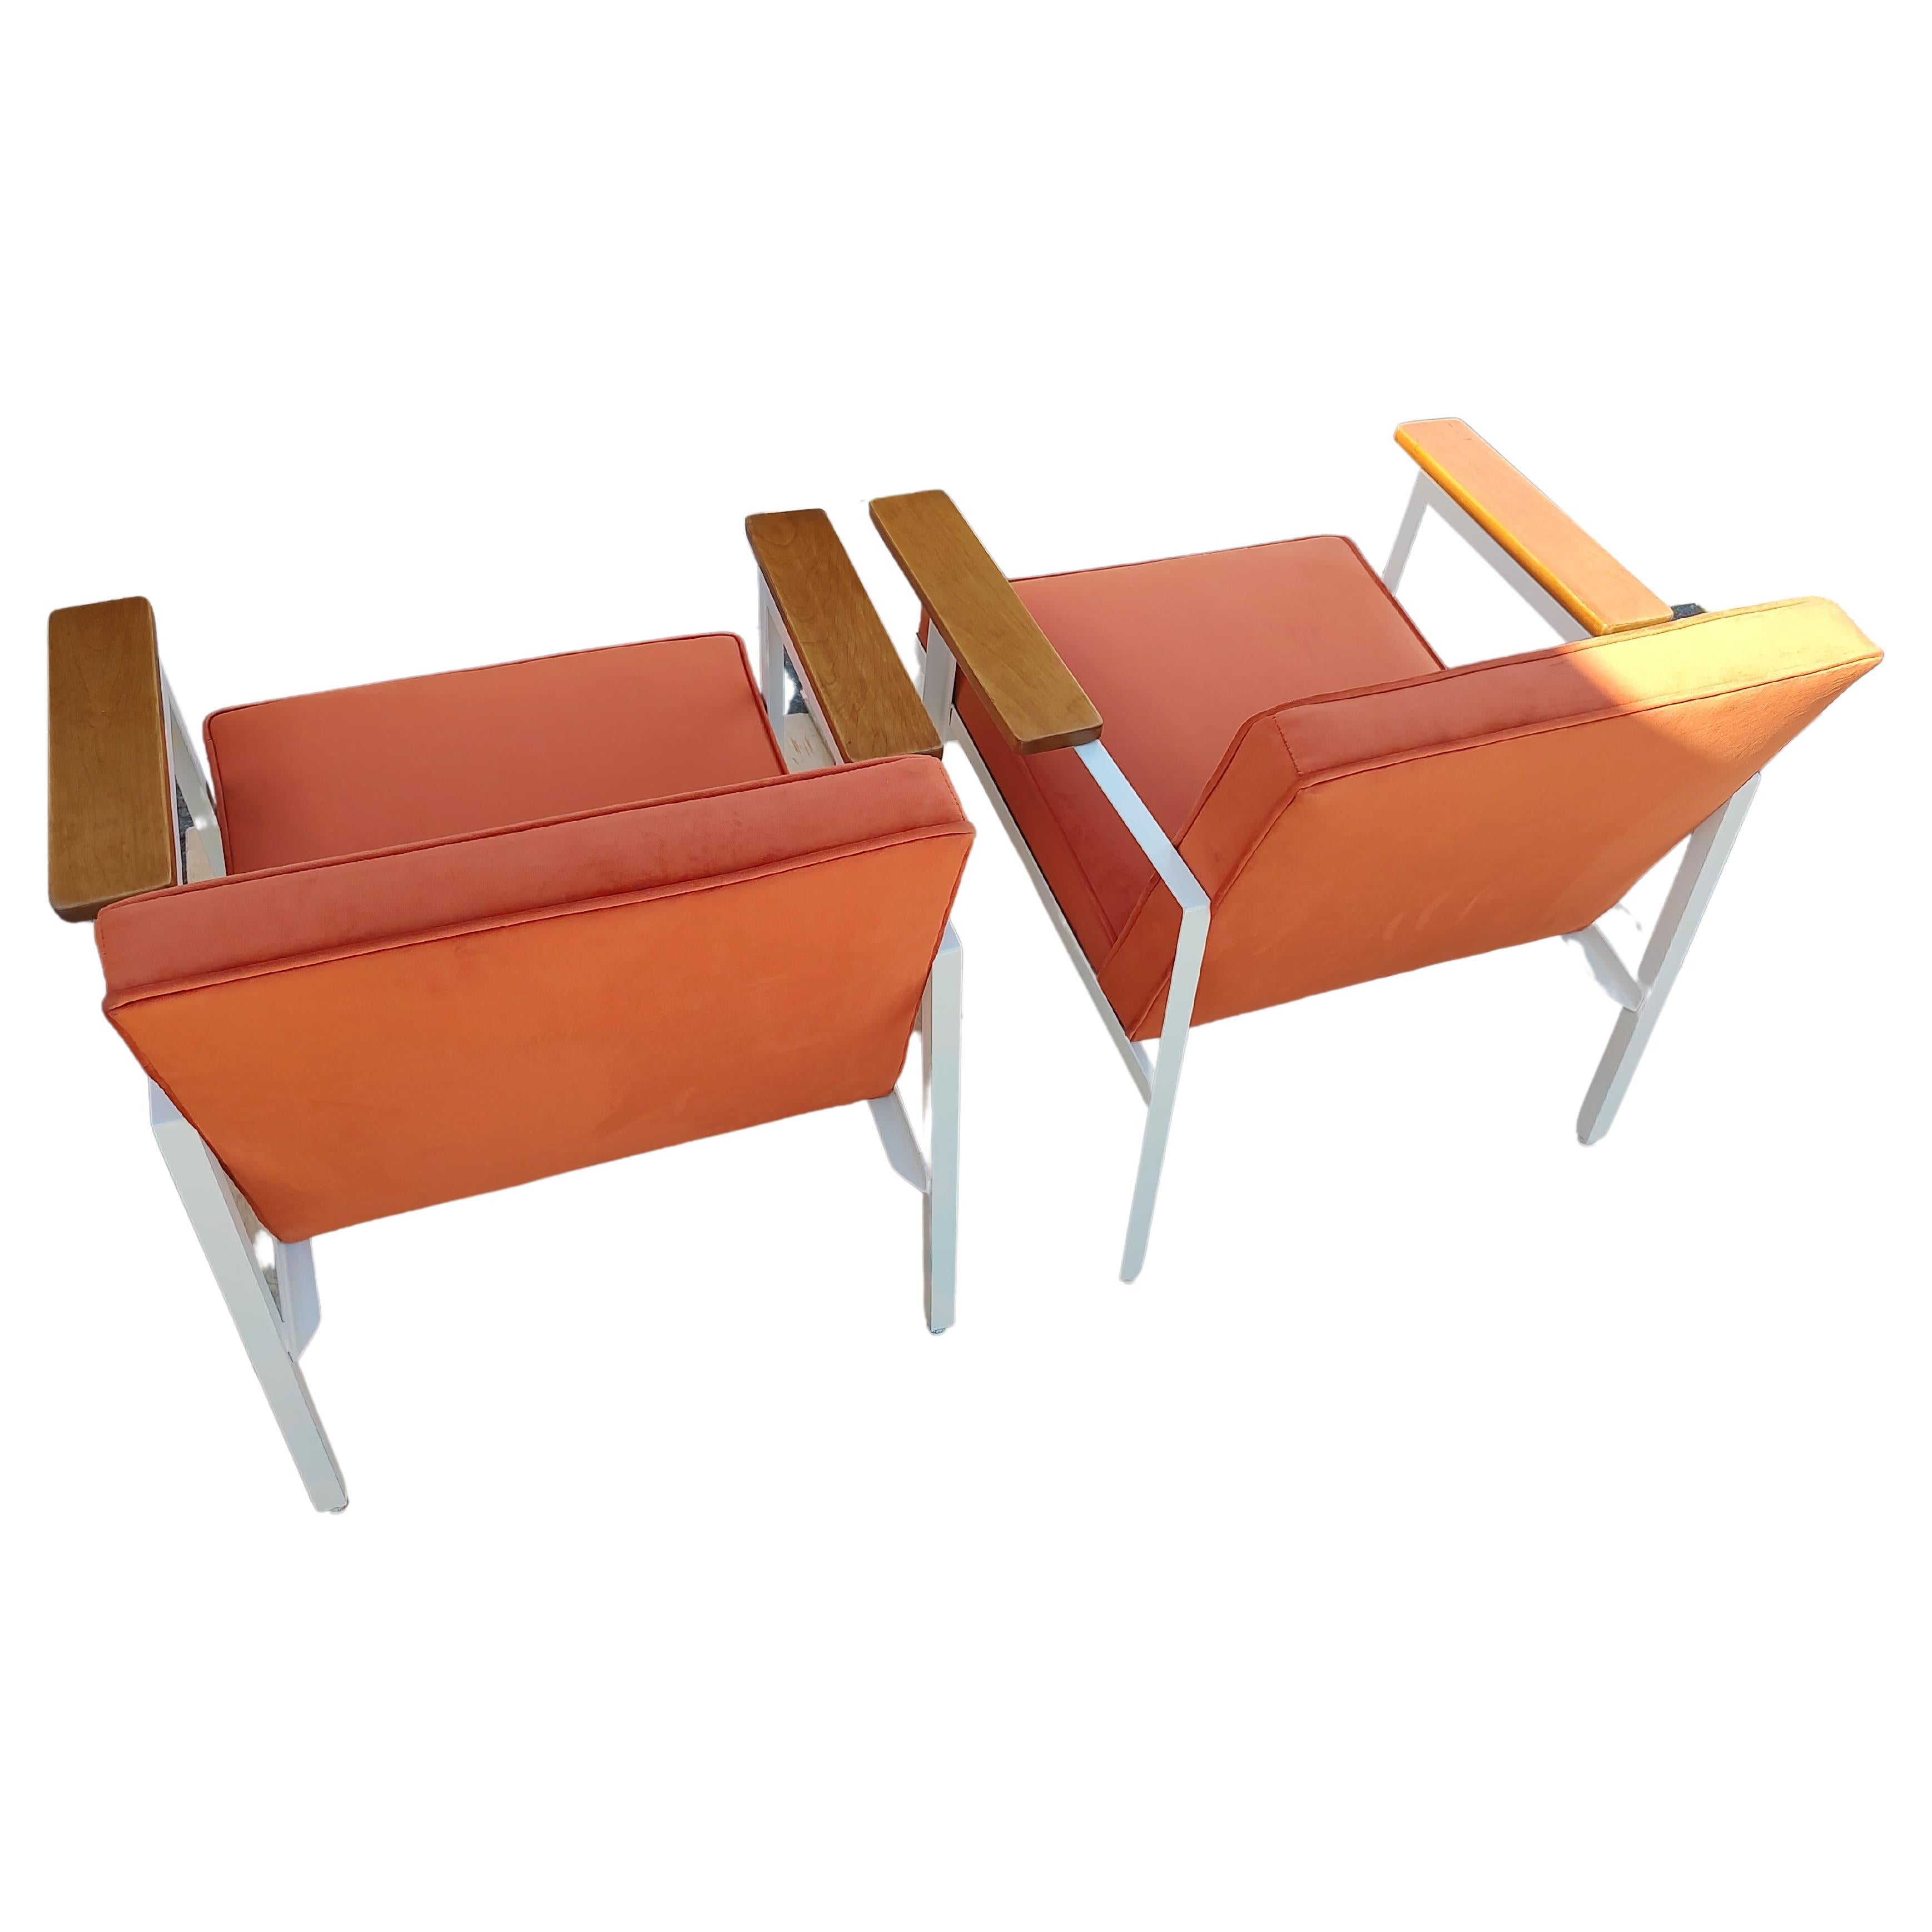 Pair Restored Mid Century Modern Lounge Chairs George Nelson for Herman Miller  In Good Condition For Sale In Port Jervis, NY